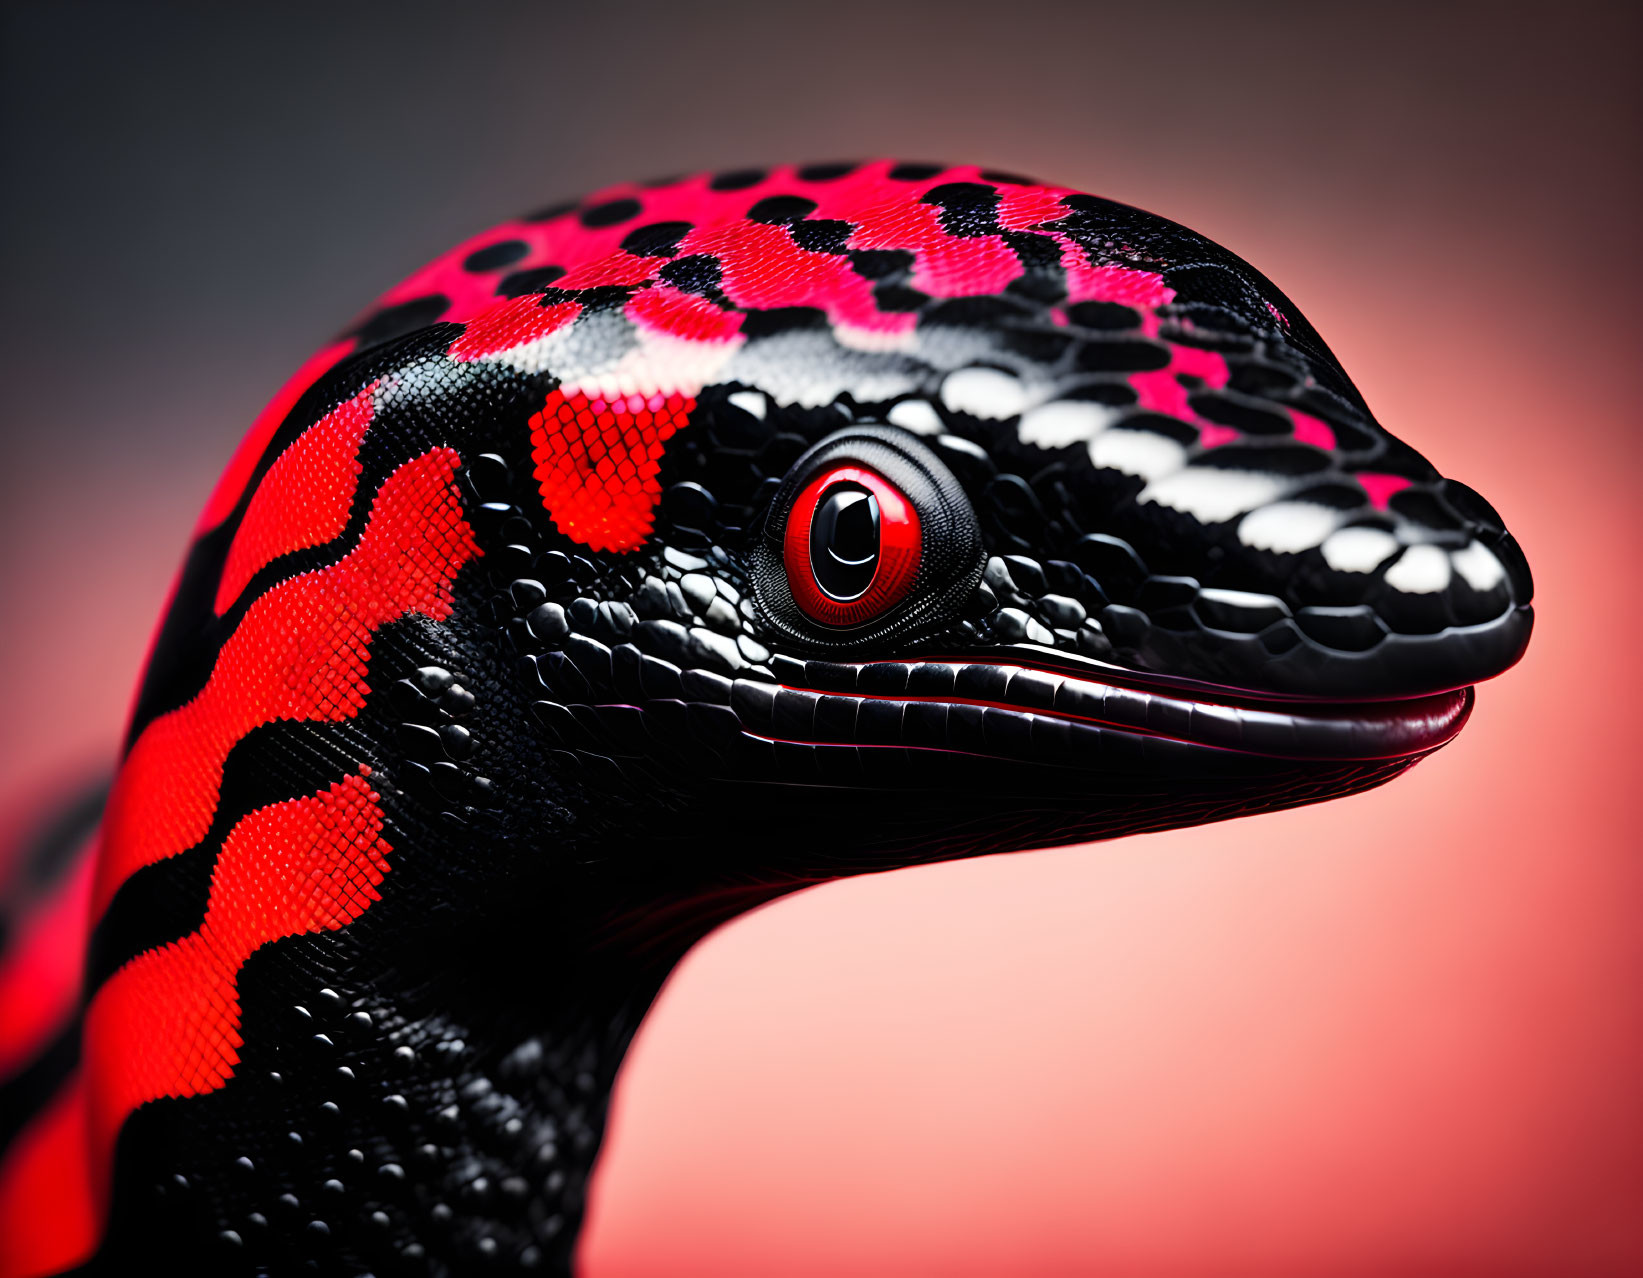 A black and red snake